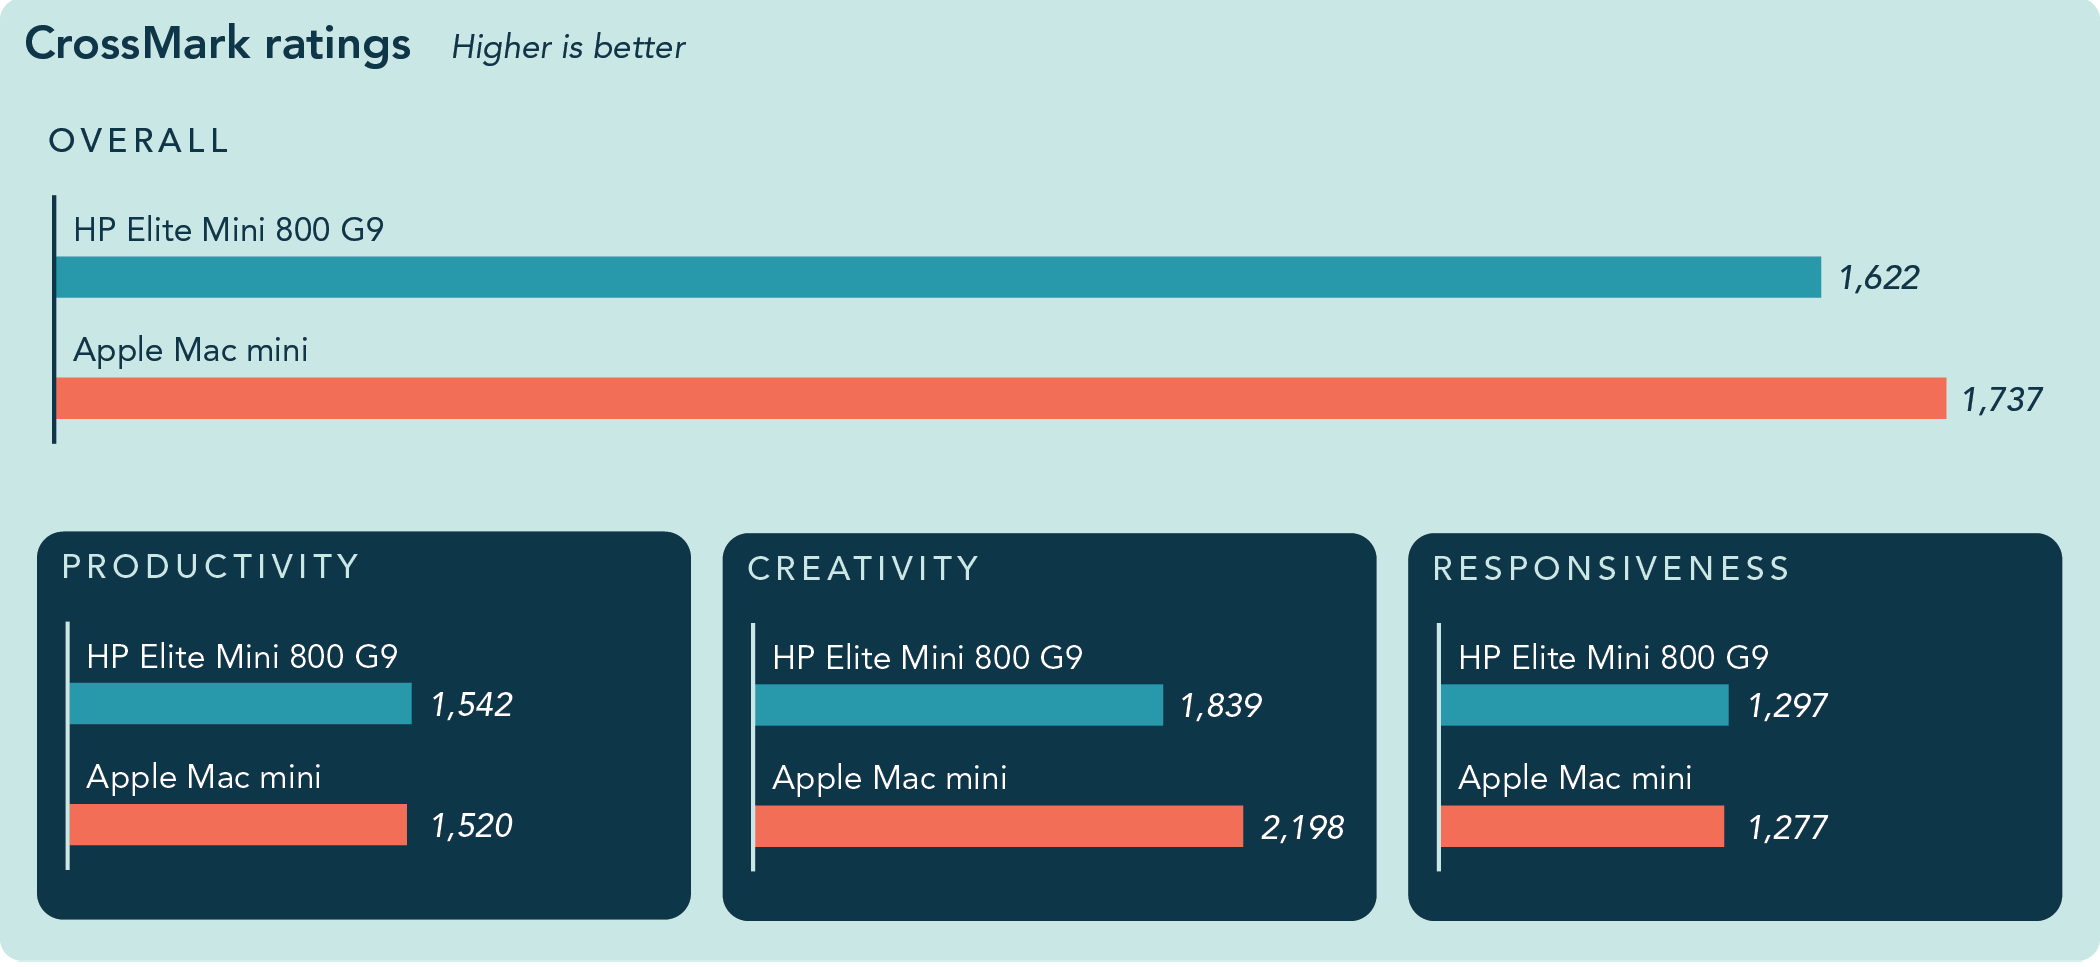 Chart comparing CrossMark scores. Higher scores are better. For overall scores, the HP Elite Mini 800 G9 has 1,622, and the Apple Mac mini has 1,737. For Productivity scores, the HP Elite Mini 800 G9 has 1,542, and the Apple Mac mini has 1,520. For Creativity scores, the HP Elite Mini 800 G9 has 1,839, and the Apple Mac mini has 2,198. For Responsiveness scores, the HP Elite Mini 800 G9 has 1,297, and the Apple Mac mini has 1,277.